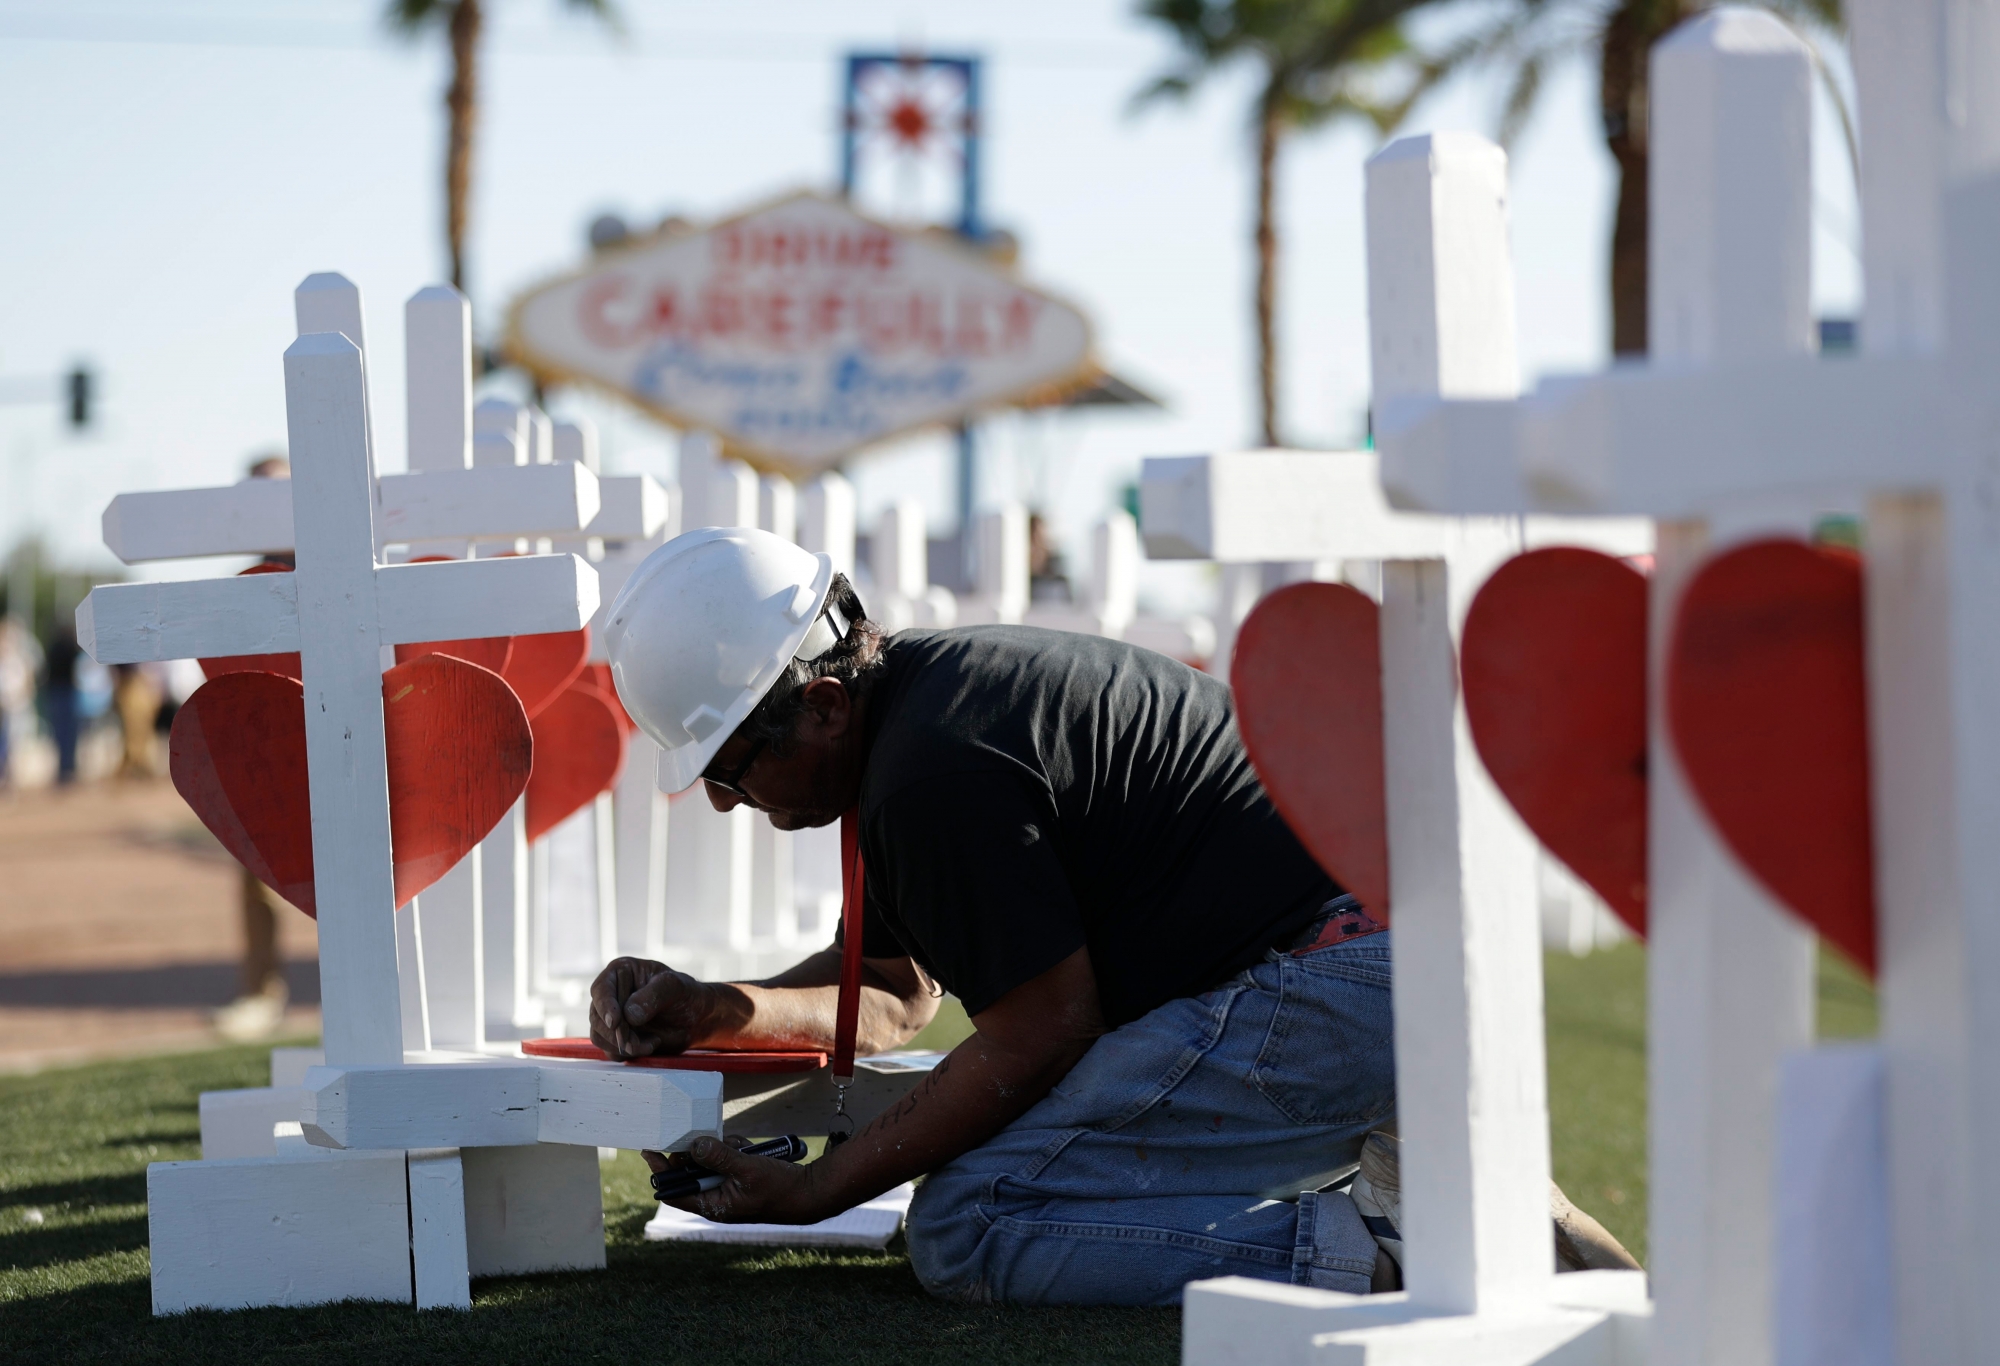 Greg Zanis writes the name of a victim of Sunday's mass shooting as he places crosses near the city's famous sign Thursday, Oct. 5, 2017, in Las Vegas. The crosses are in honor of those killed when Stephen Craig Paddock broke windows on the Mandalay Bay resort and casino and began firing with a cache of weapons onto a country music festival Sunday. Dozens of people were killed and hundreds were injured. (AP Photo/Gregory Bull) Las Vegas Shooting